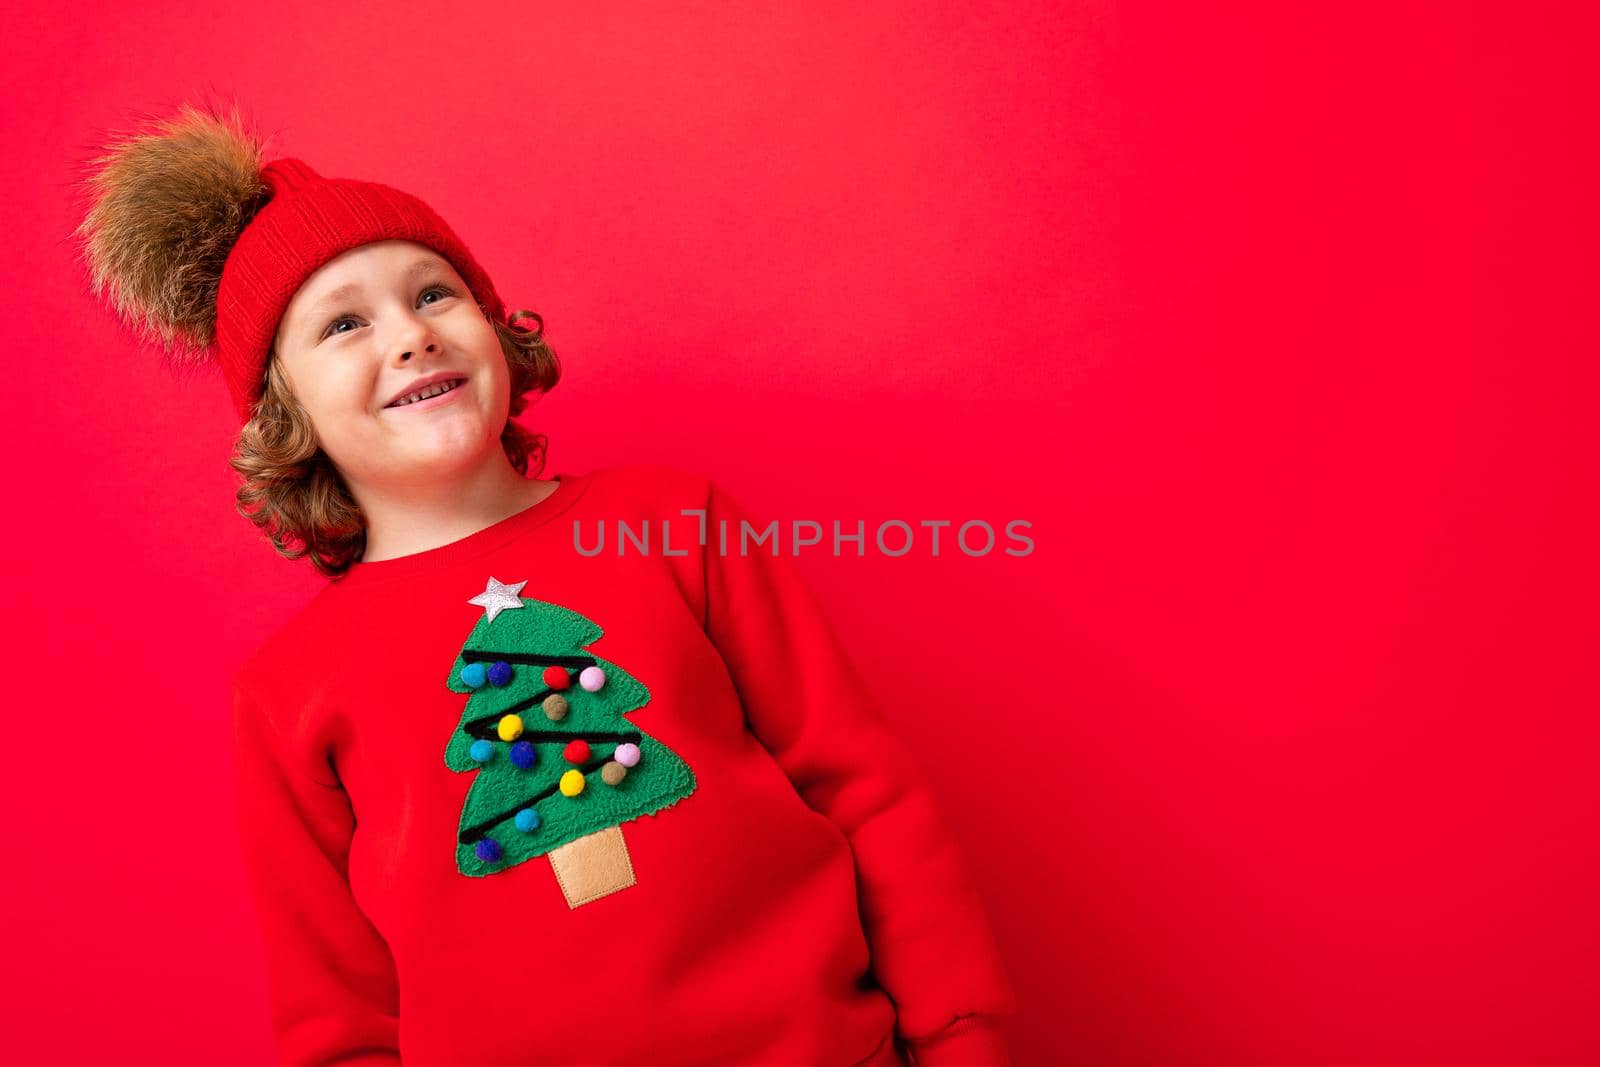 cute blond boy in warm hat and christmas sweater on red background with smile on his face.